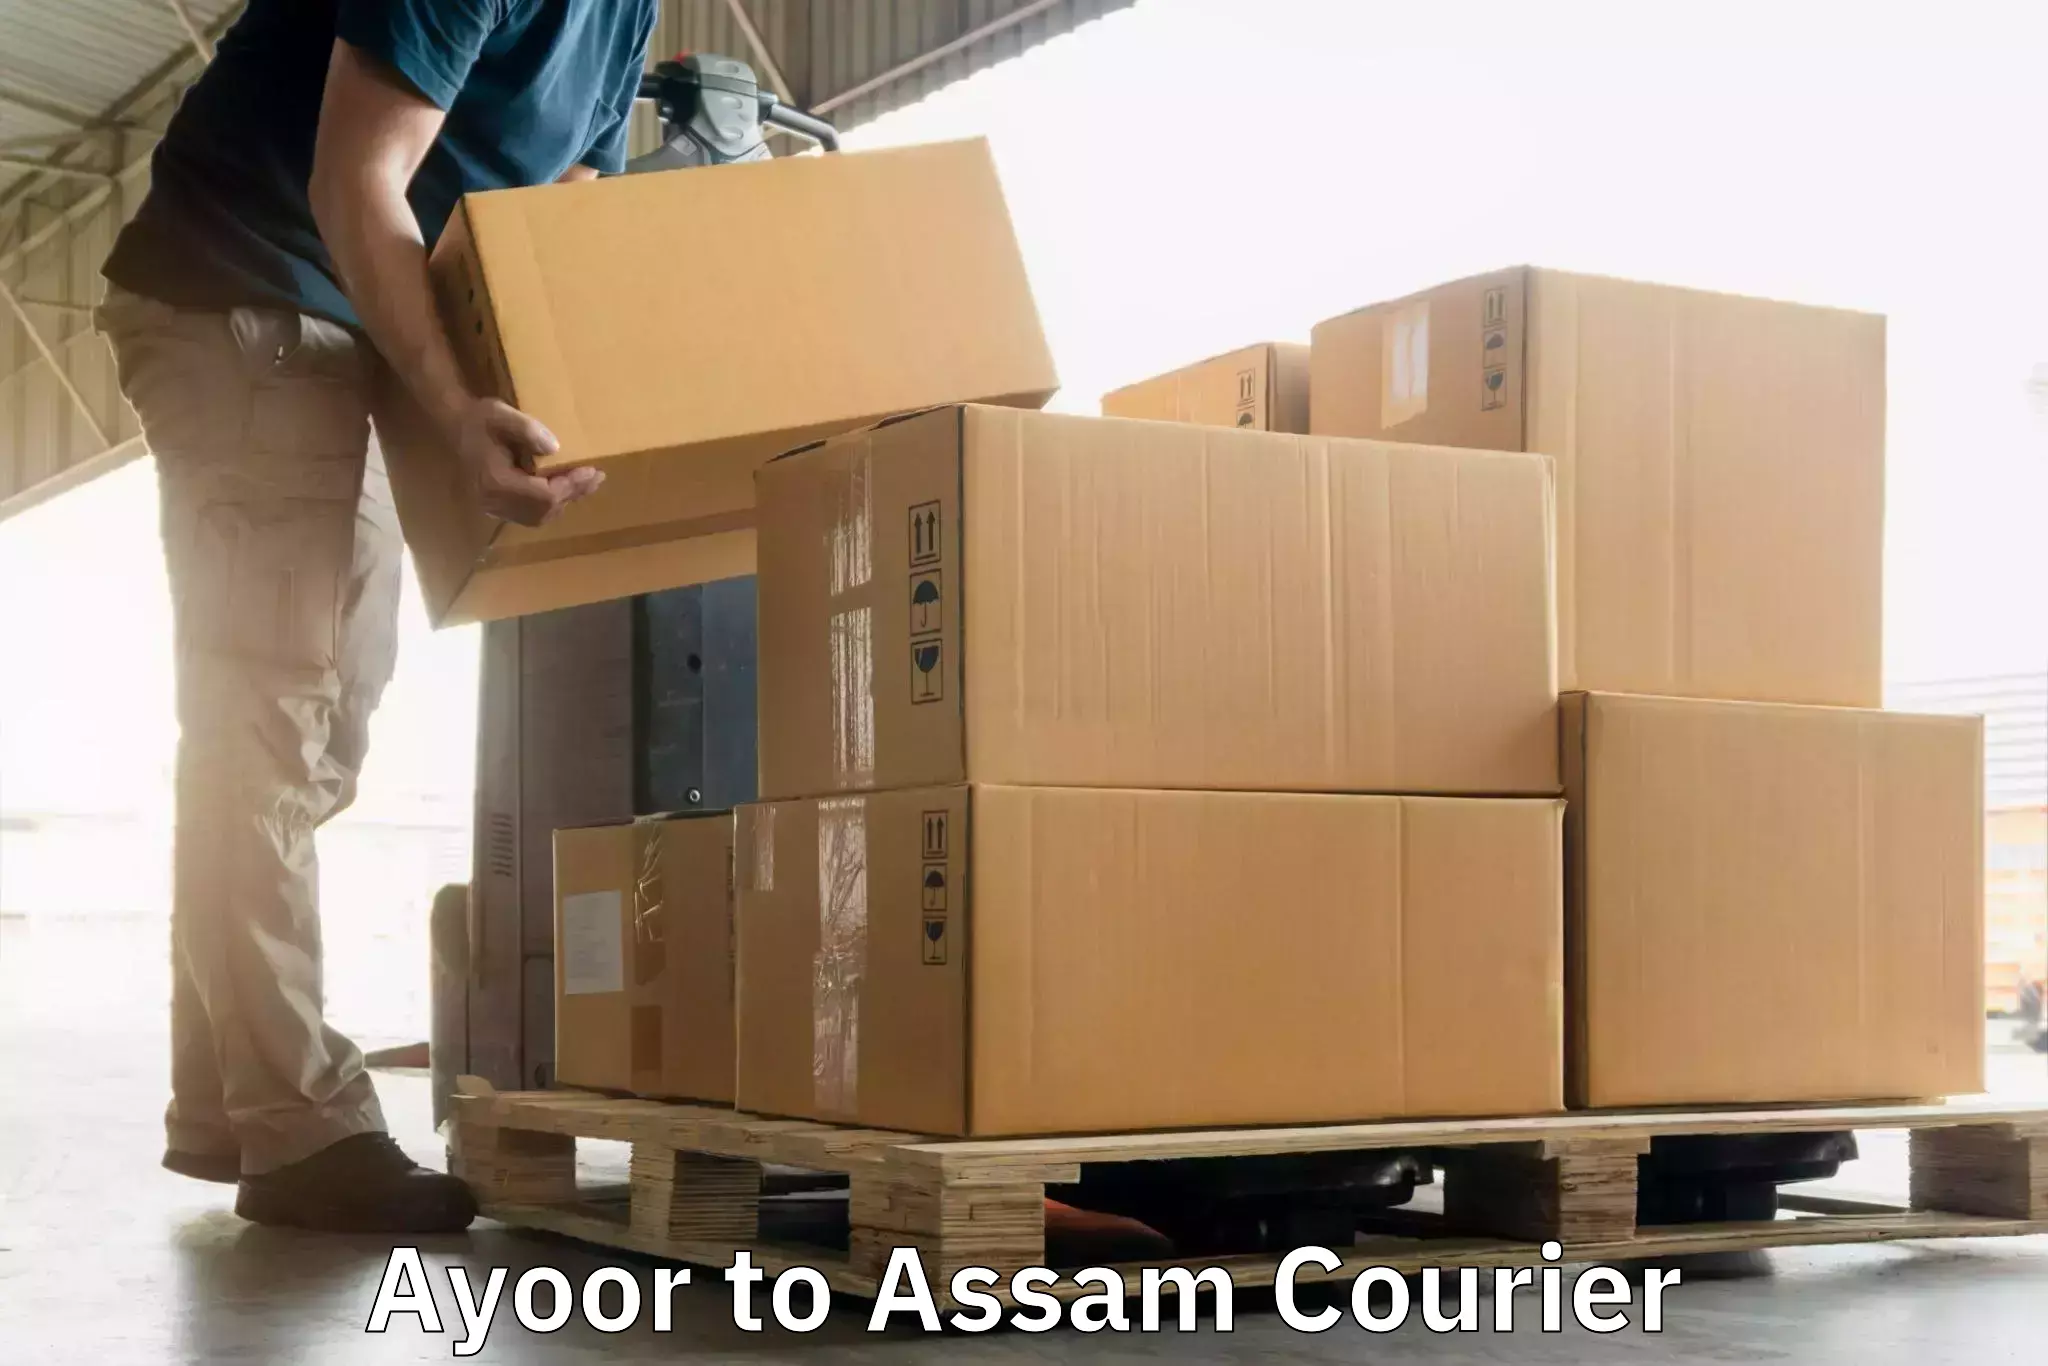 Affordable parcel service Ayoor to Assam